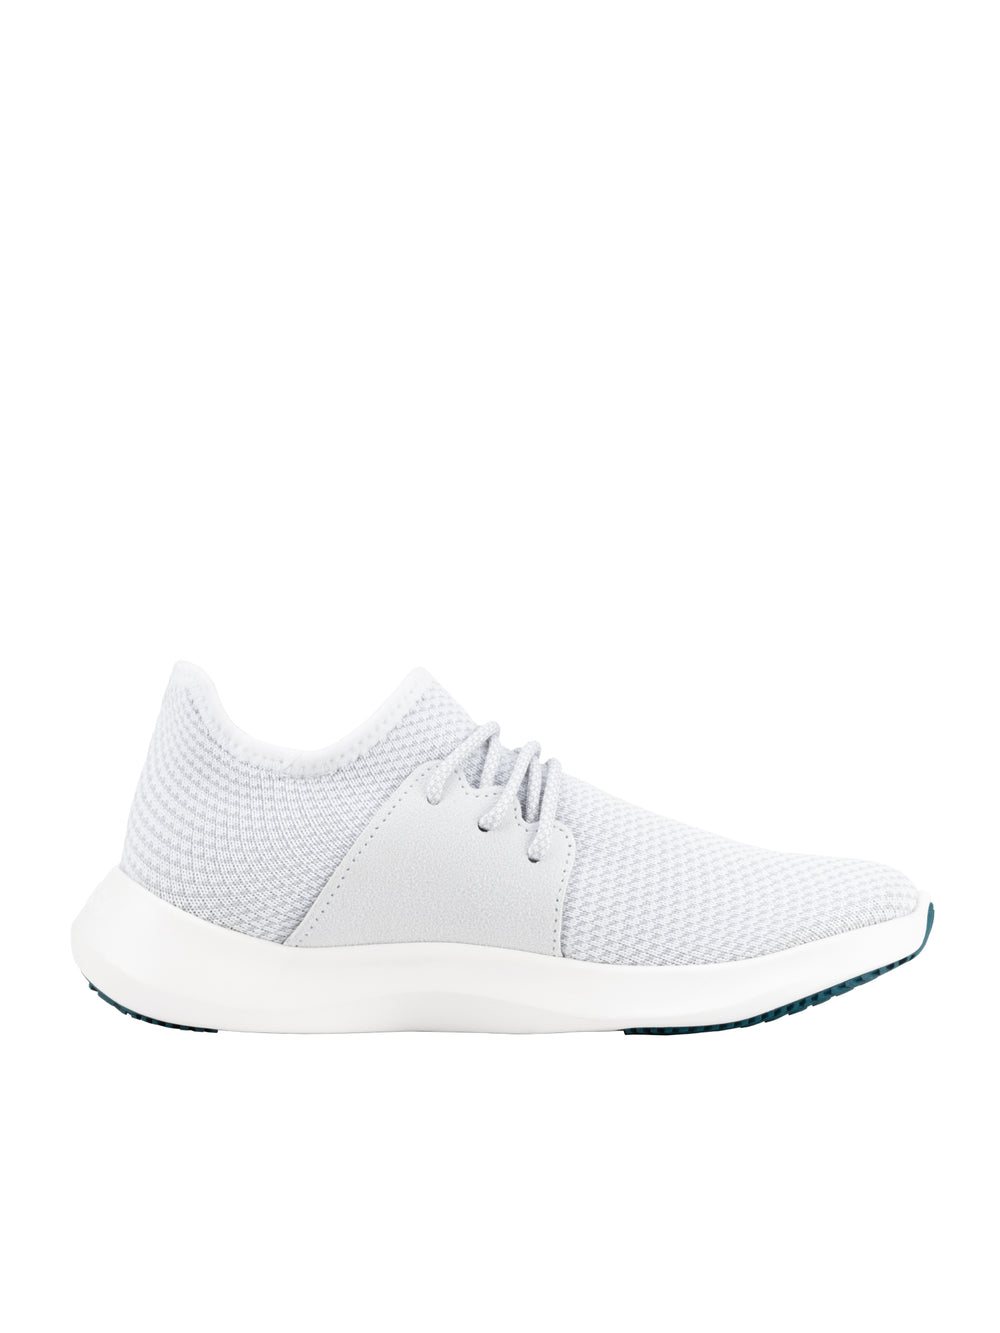 MENS VESSI EVERYDAY CLS SNEAKER - WHITE